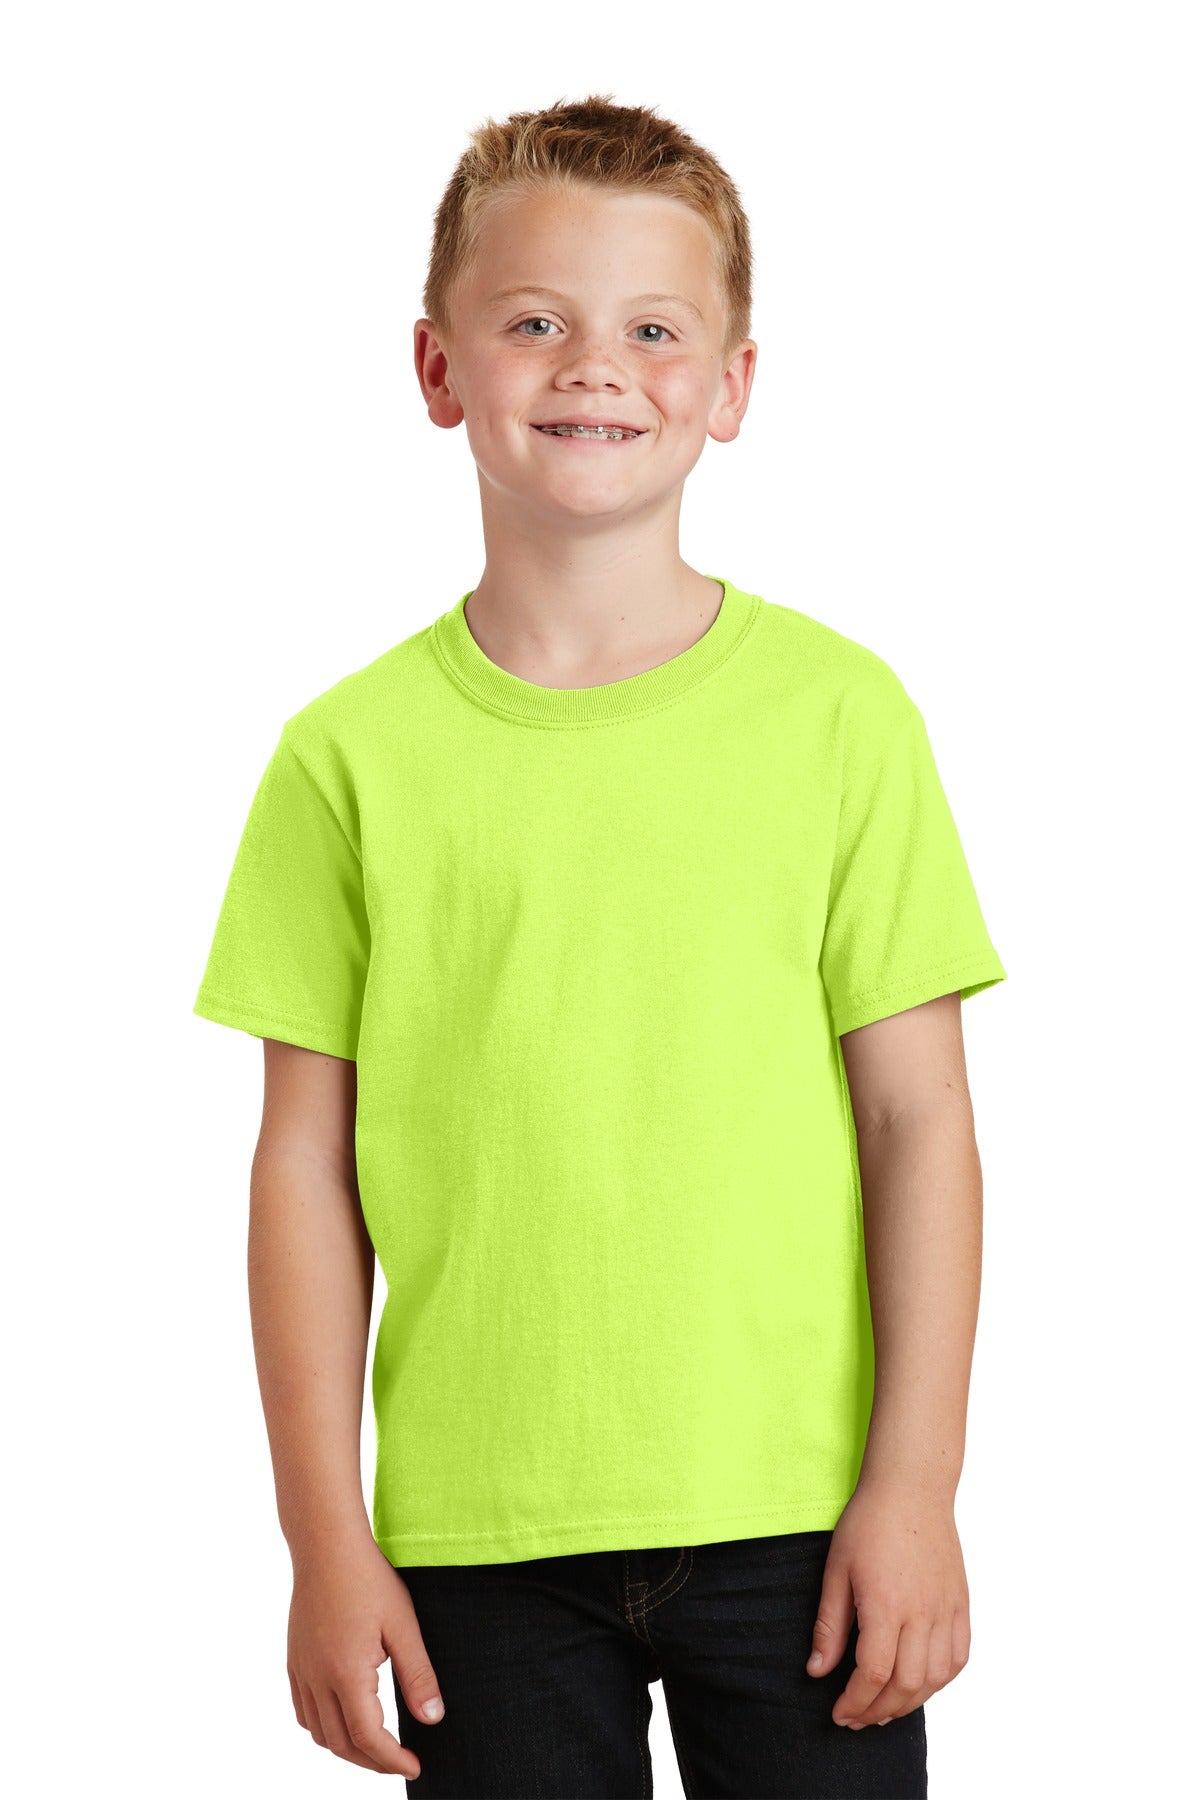 Port & Company - Youth Core Cotton Tee. PC54Y - Neon Yellow